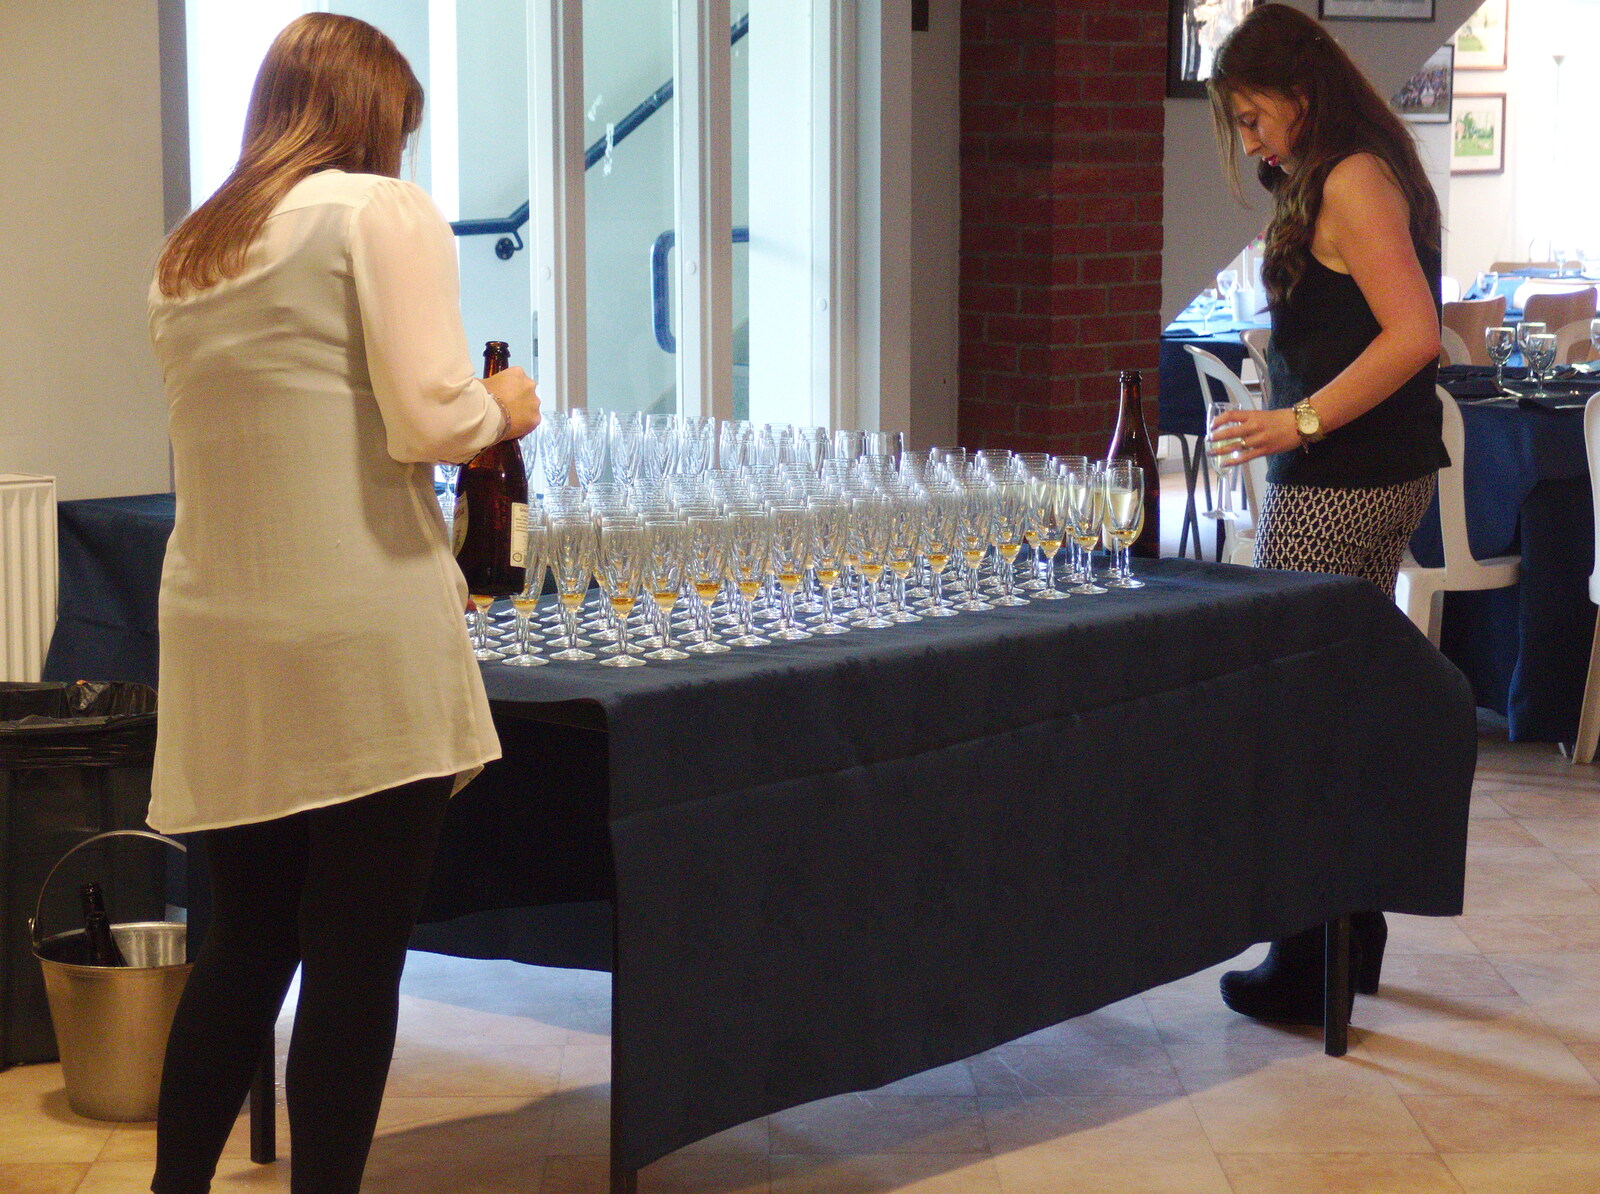 A load of fizz glasses are prepared from The BBs at Diss Rugby Club, Bellrope Lane, Roydon, Norfolk - 7th June 2014